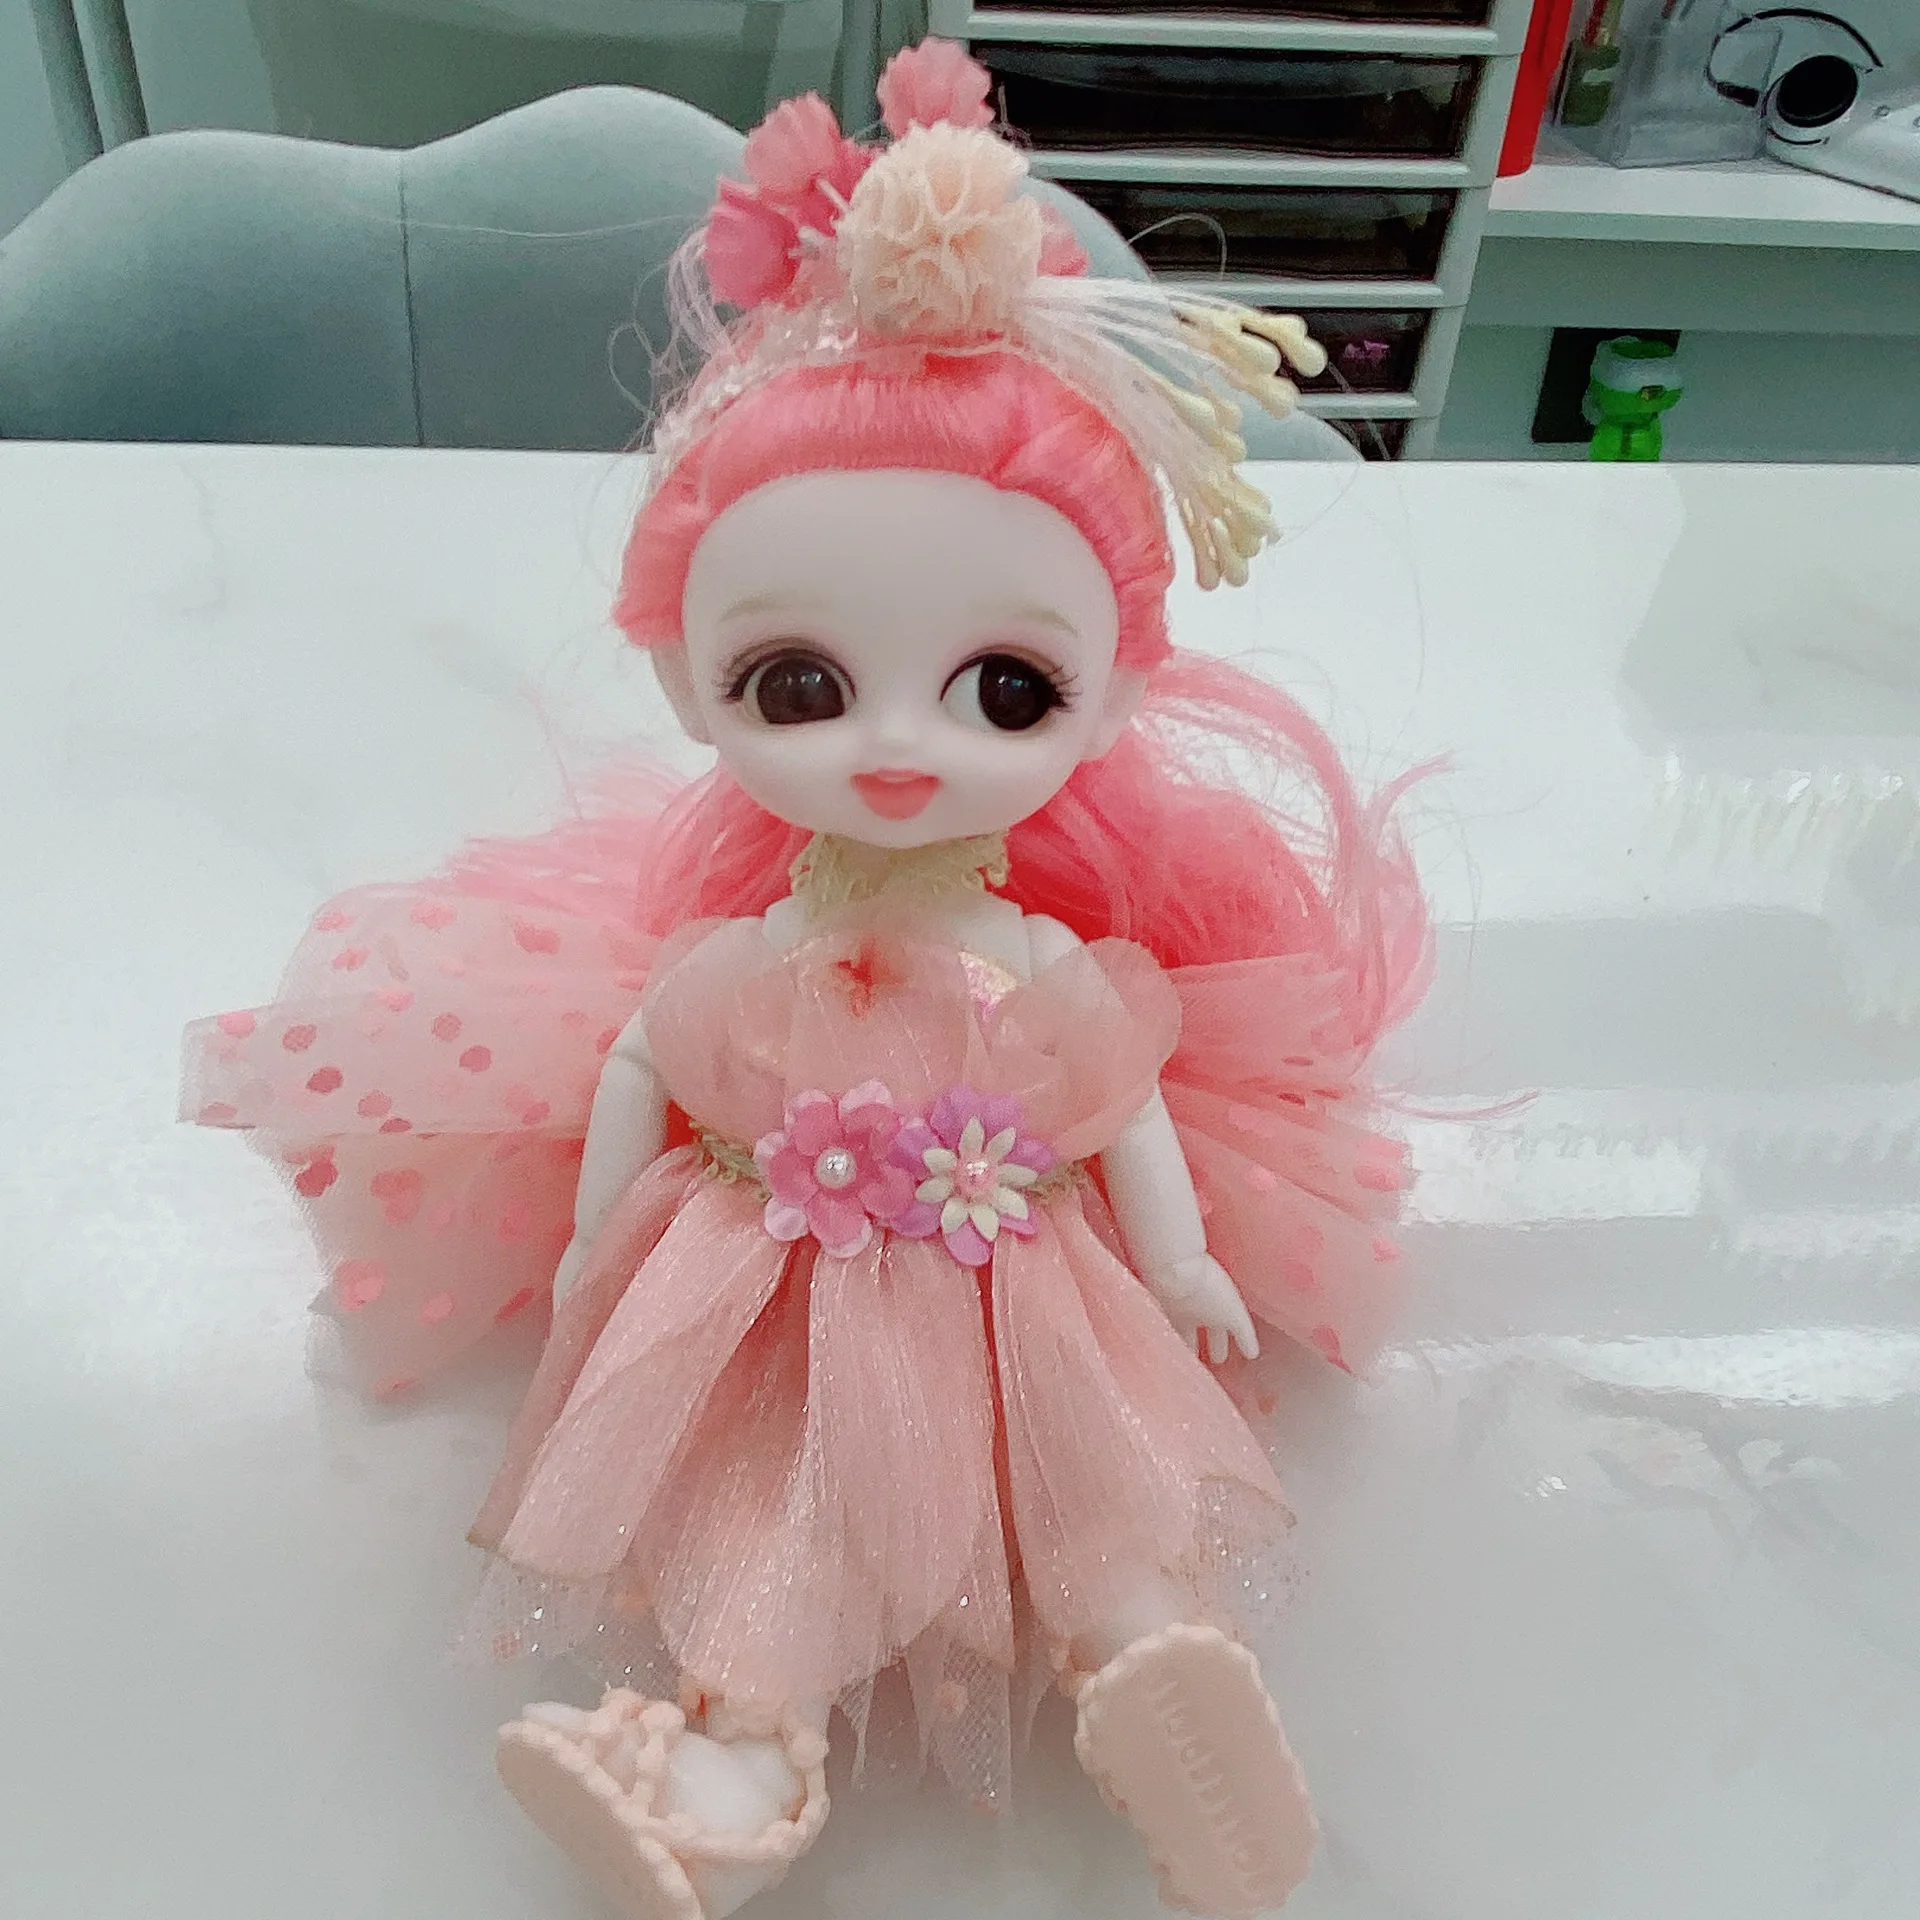 New 16cm BJD Doll Toy Fashion 1/12 Mini Cute Fairy Wing Doll Set 13 Movable Joints 3D Big Eyes Children's Toy Girl Birthday Gift